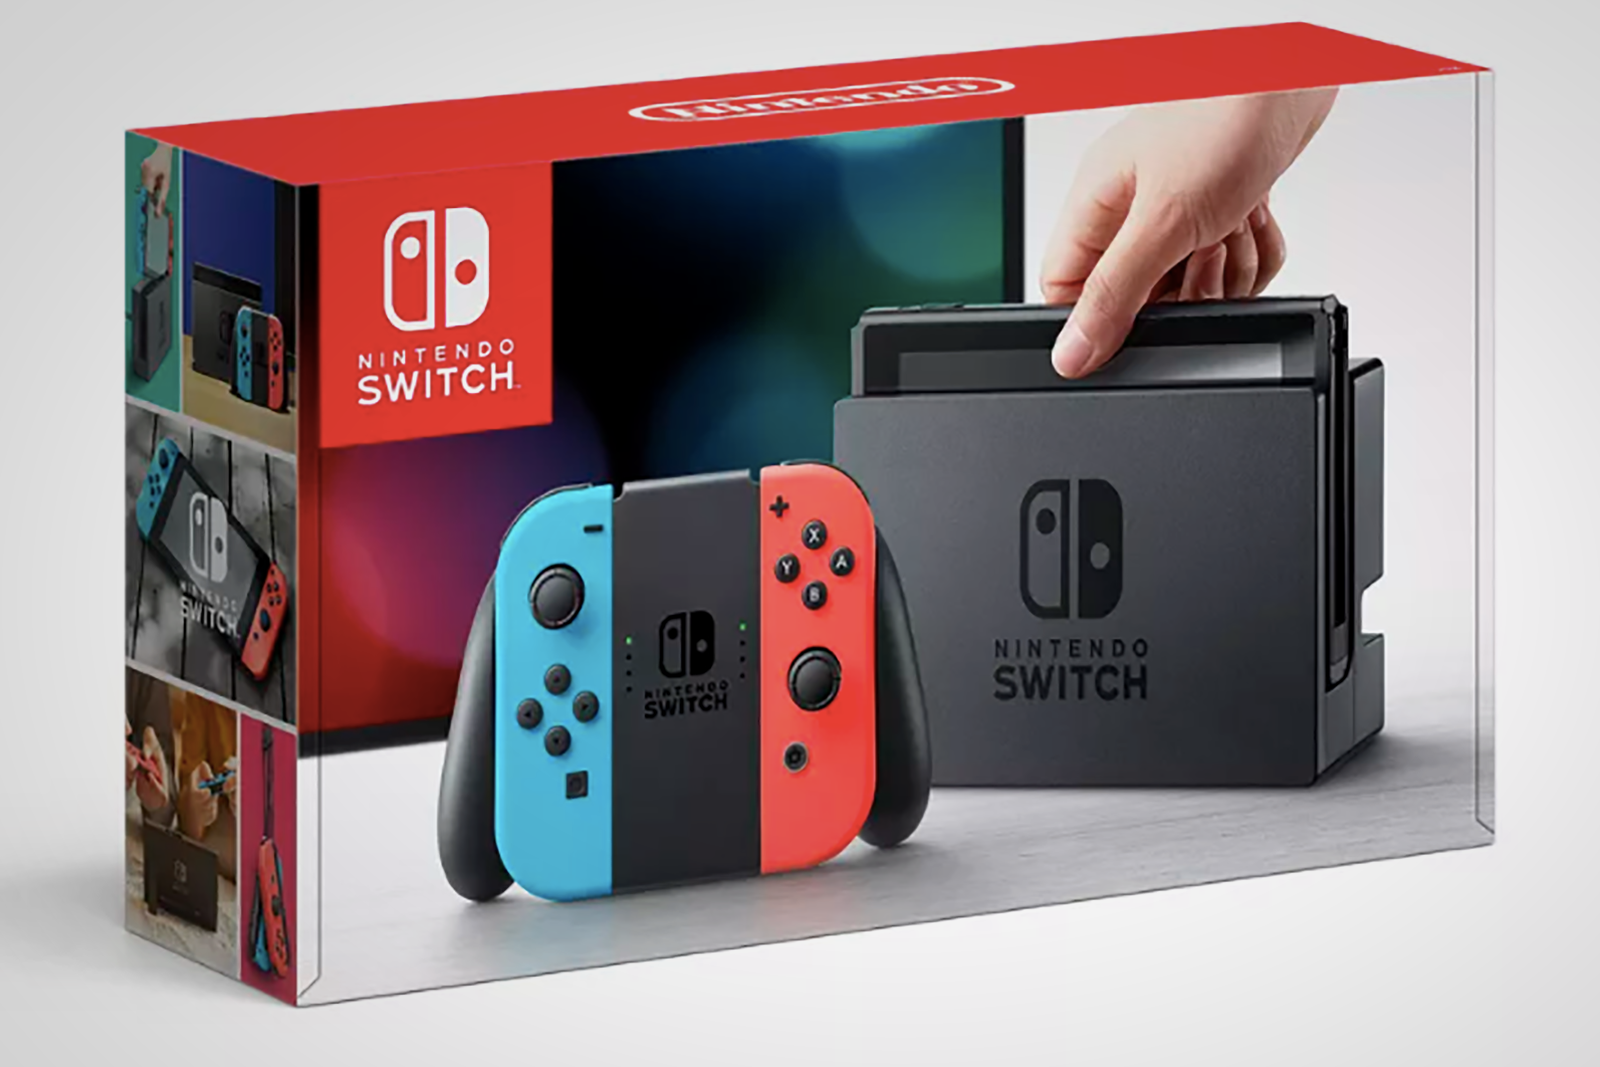 How to tell if youre buying the new or old Nintendo Switch image 2